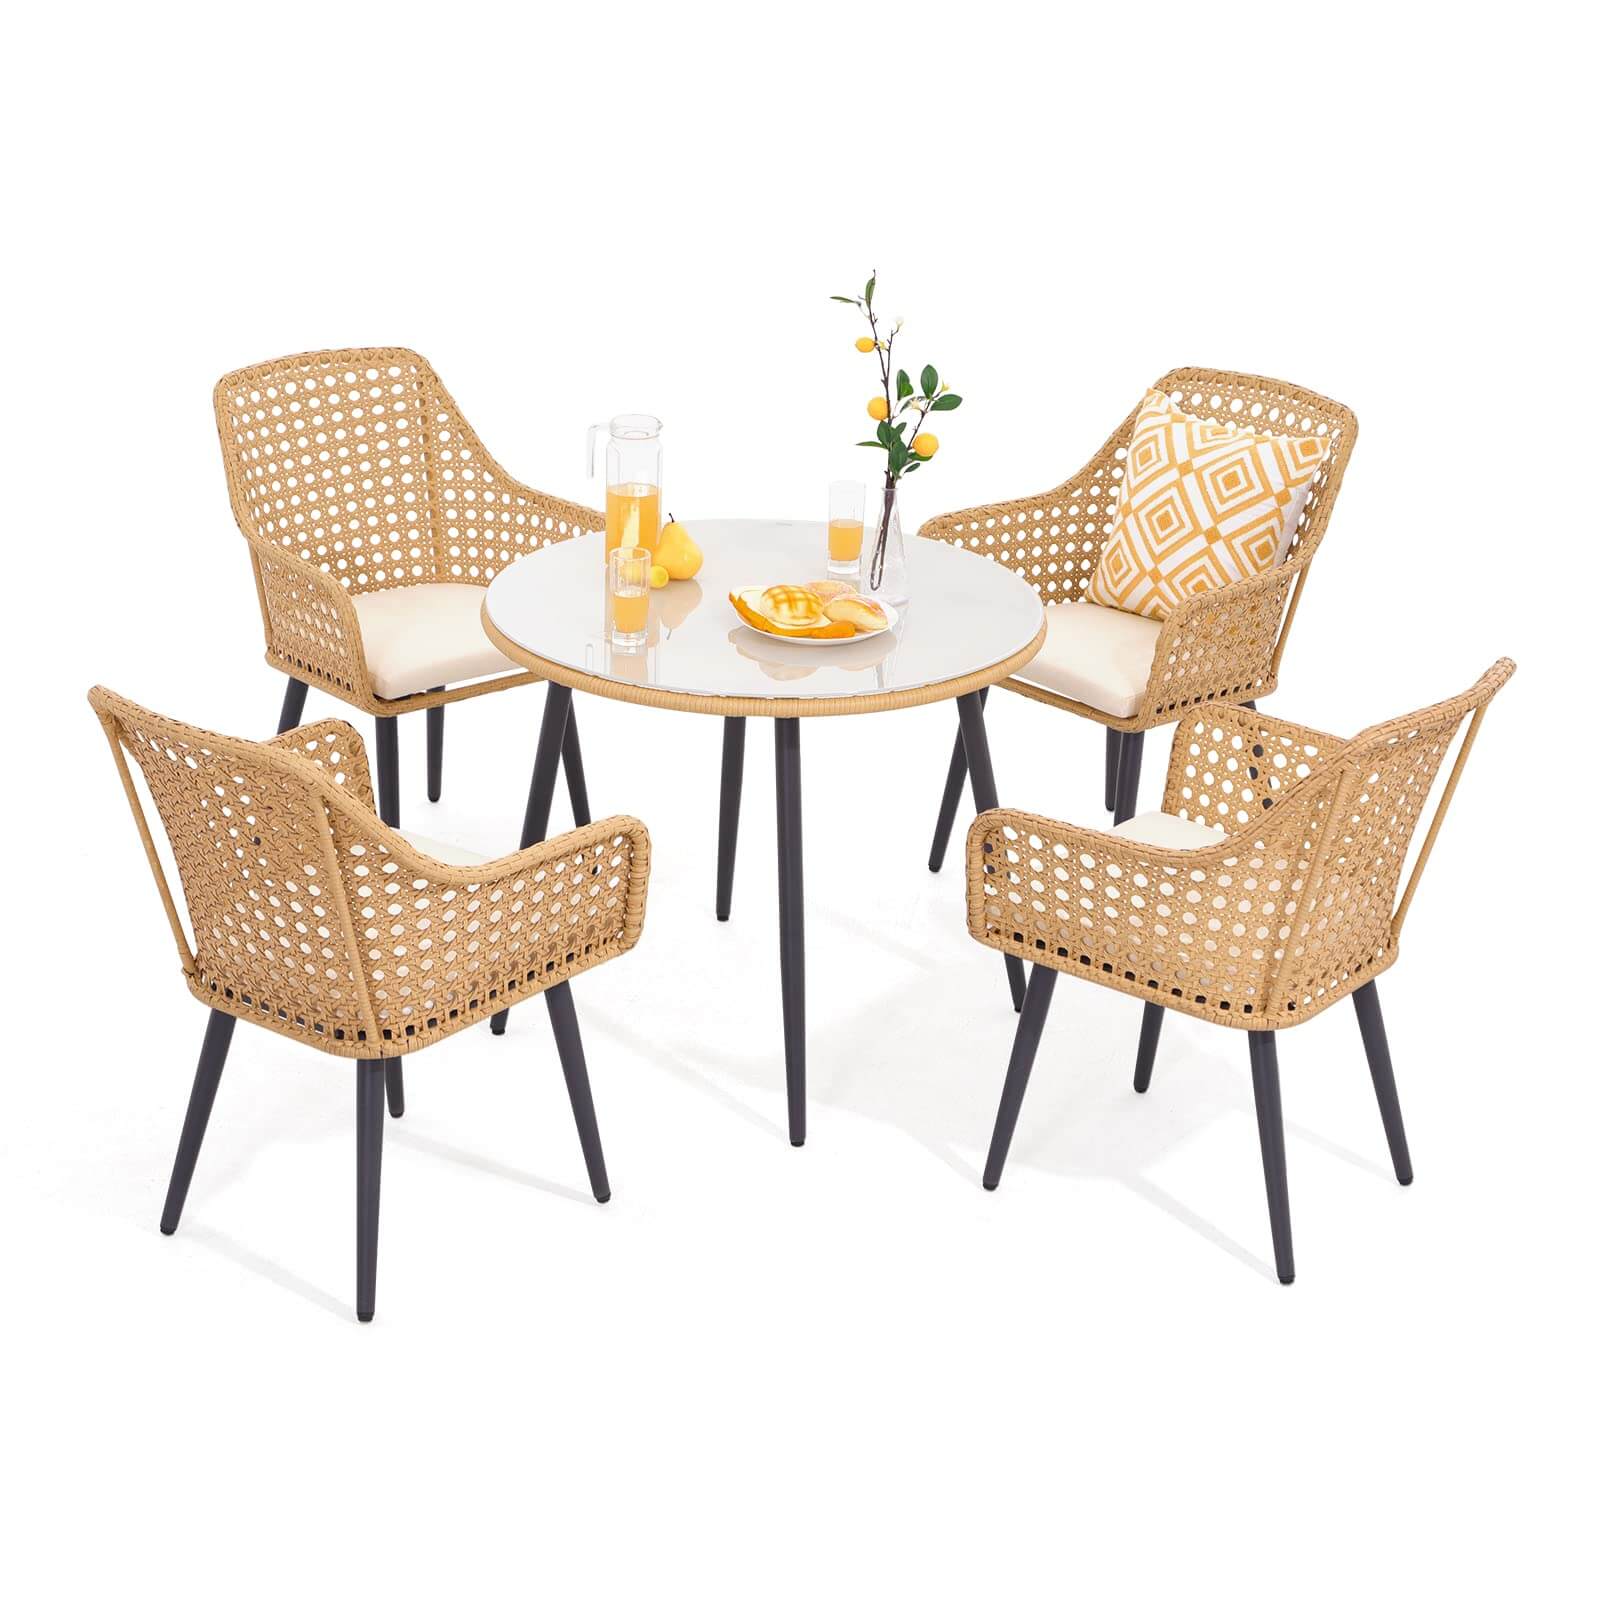  5 Pieces Outdoor Dining Set, All-Weather Wicker Patio Dining Table and Chairs